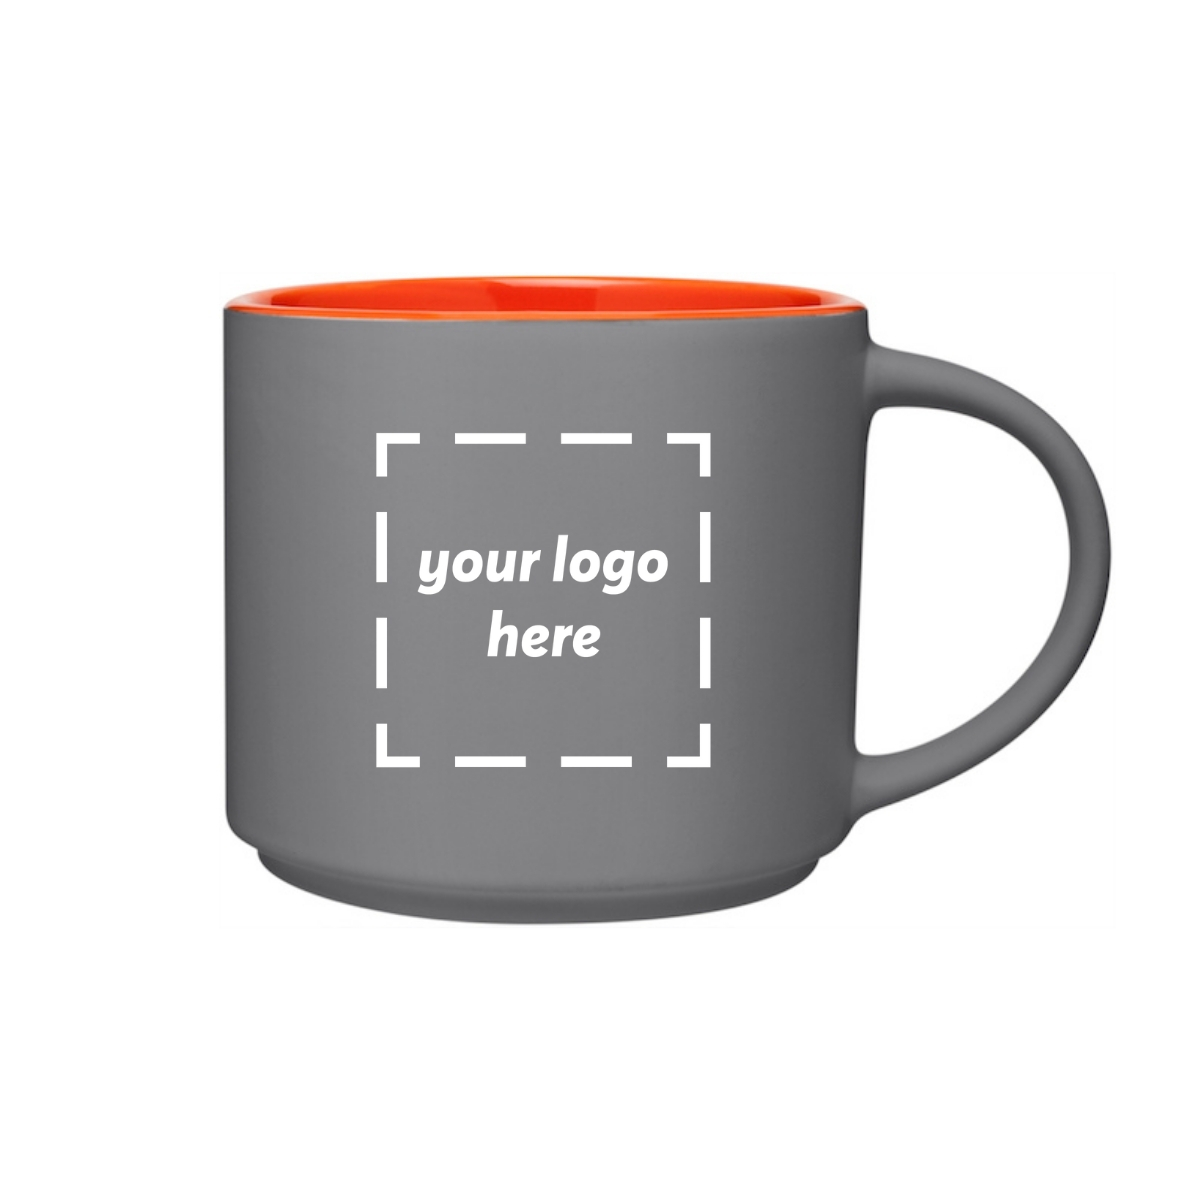 16 Oz. Monaco Mug shown in Grey/Orange with "your logo here" on the front